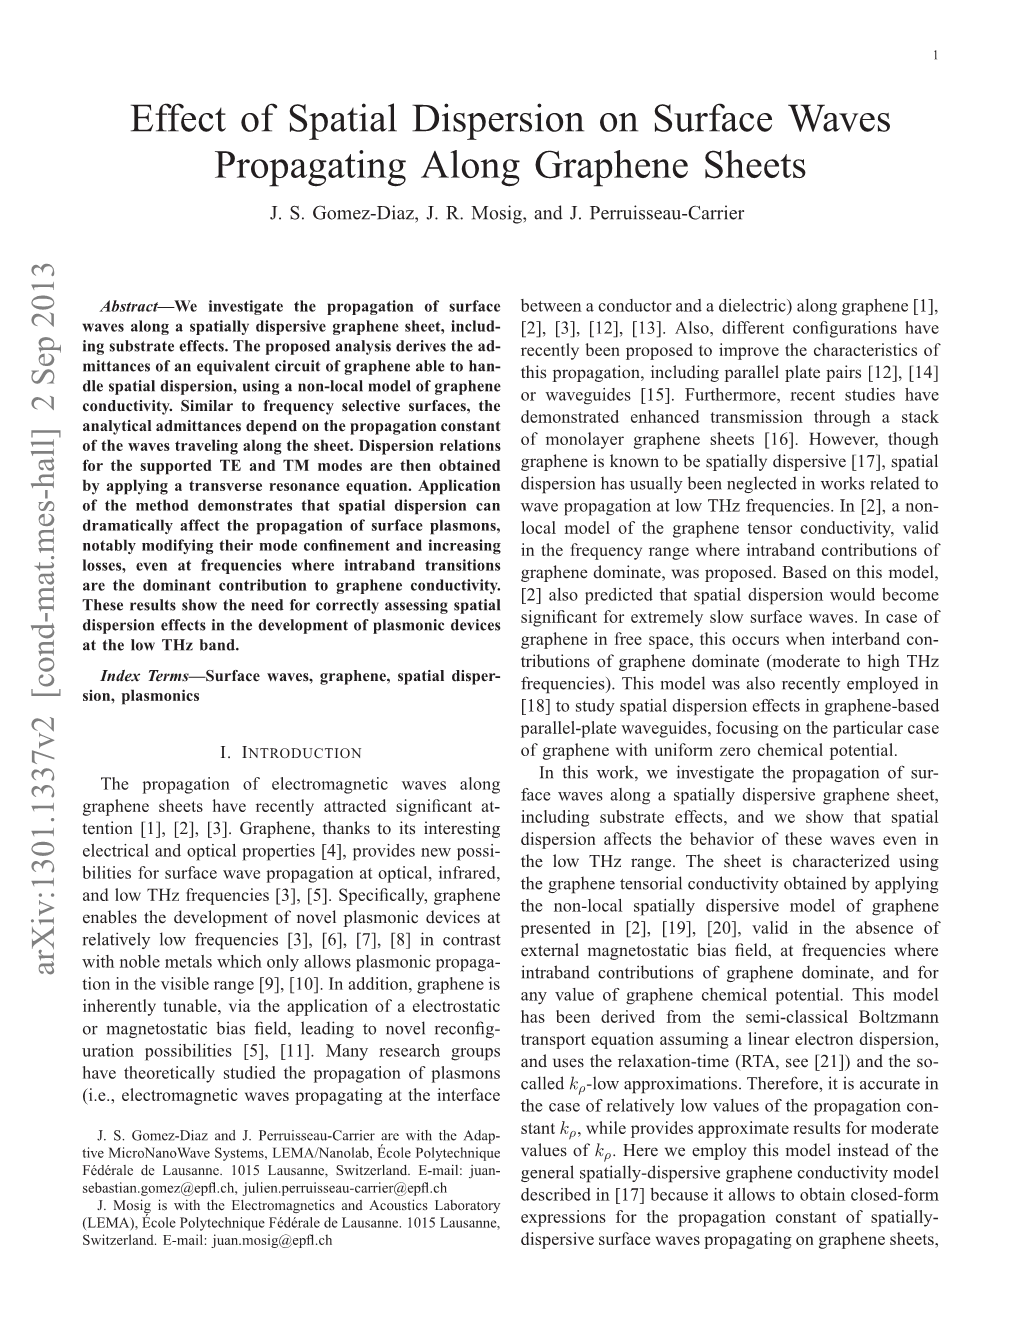 Effect of Spatial Dispersion on Surface Waves Propagating Along Graphene Sheets